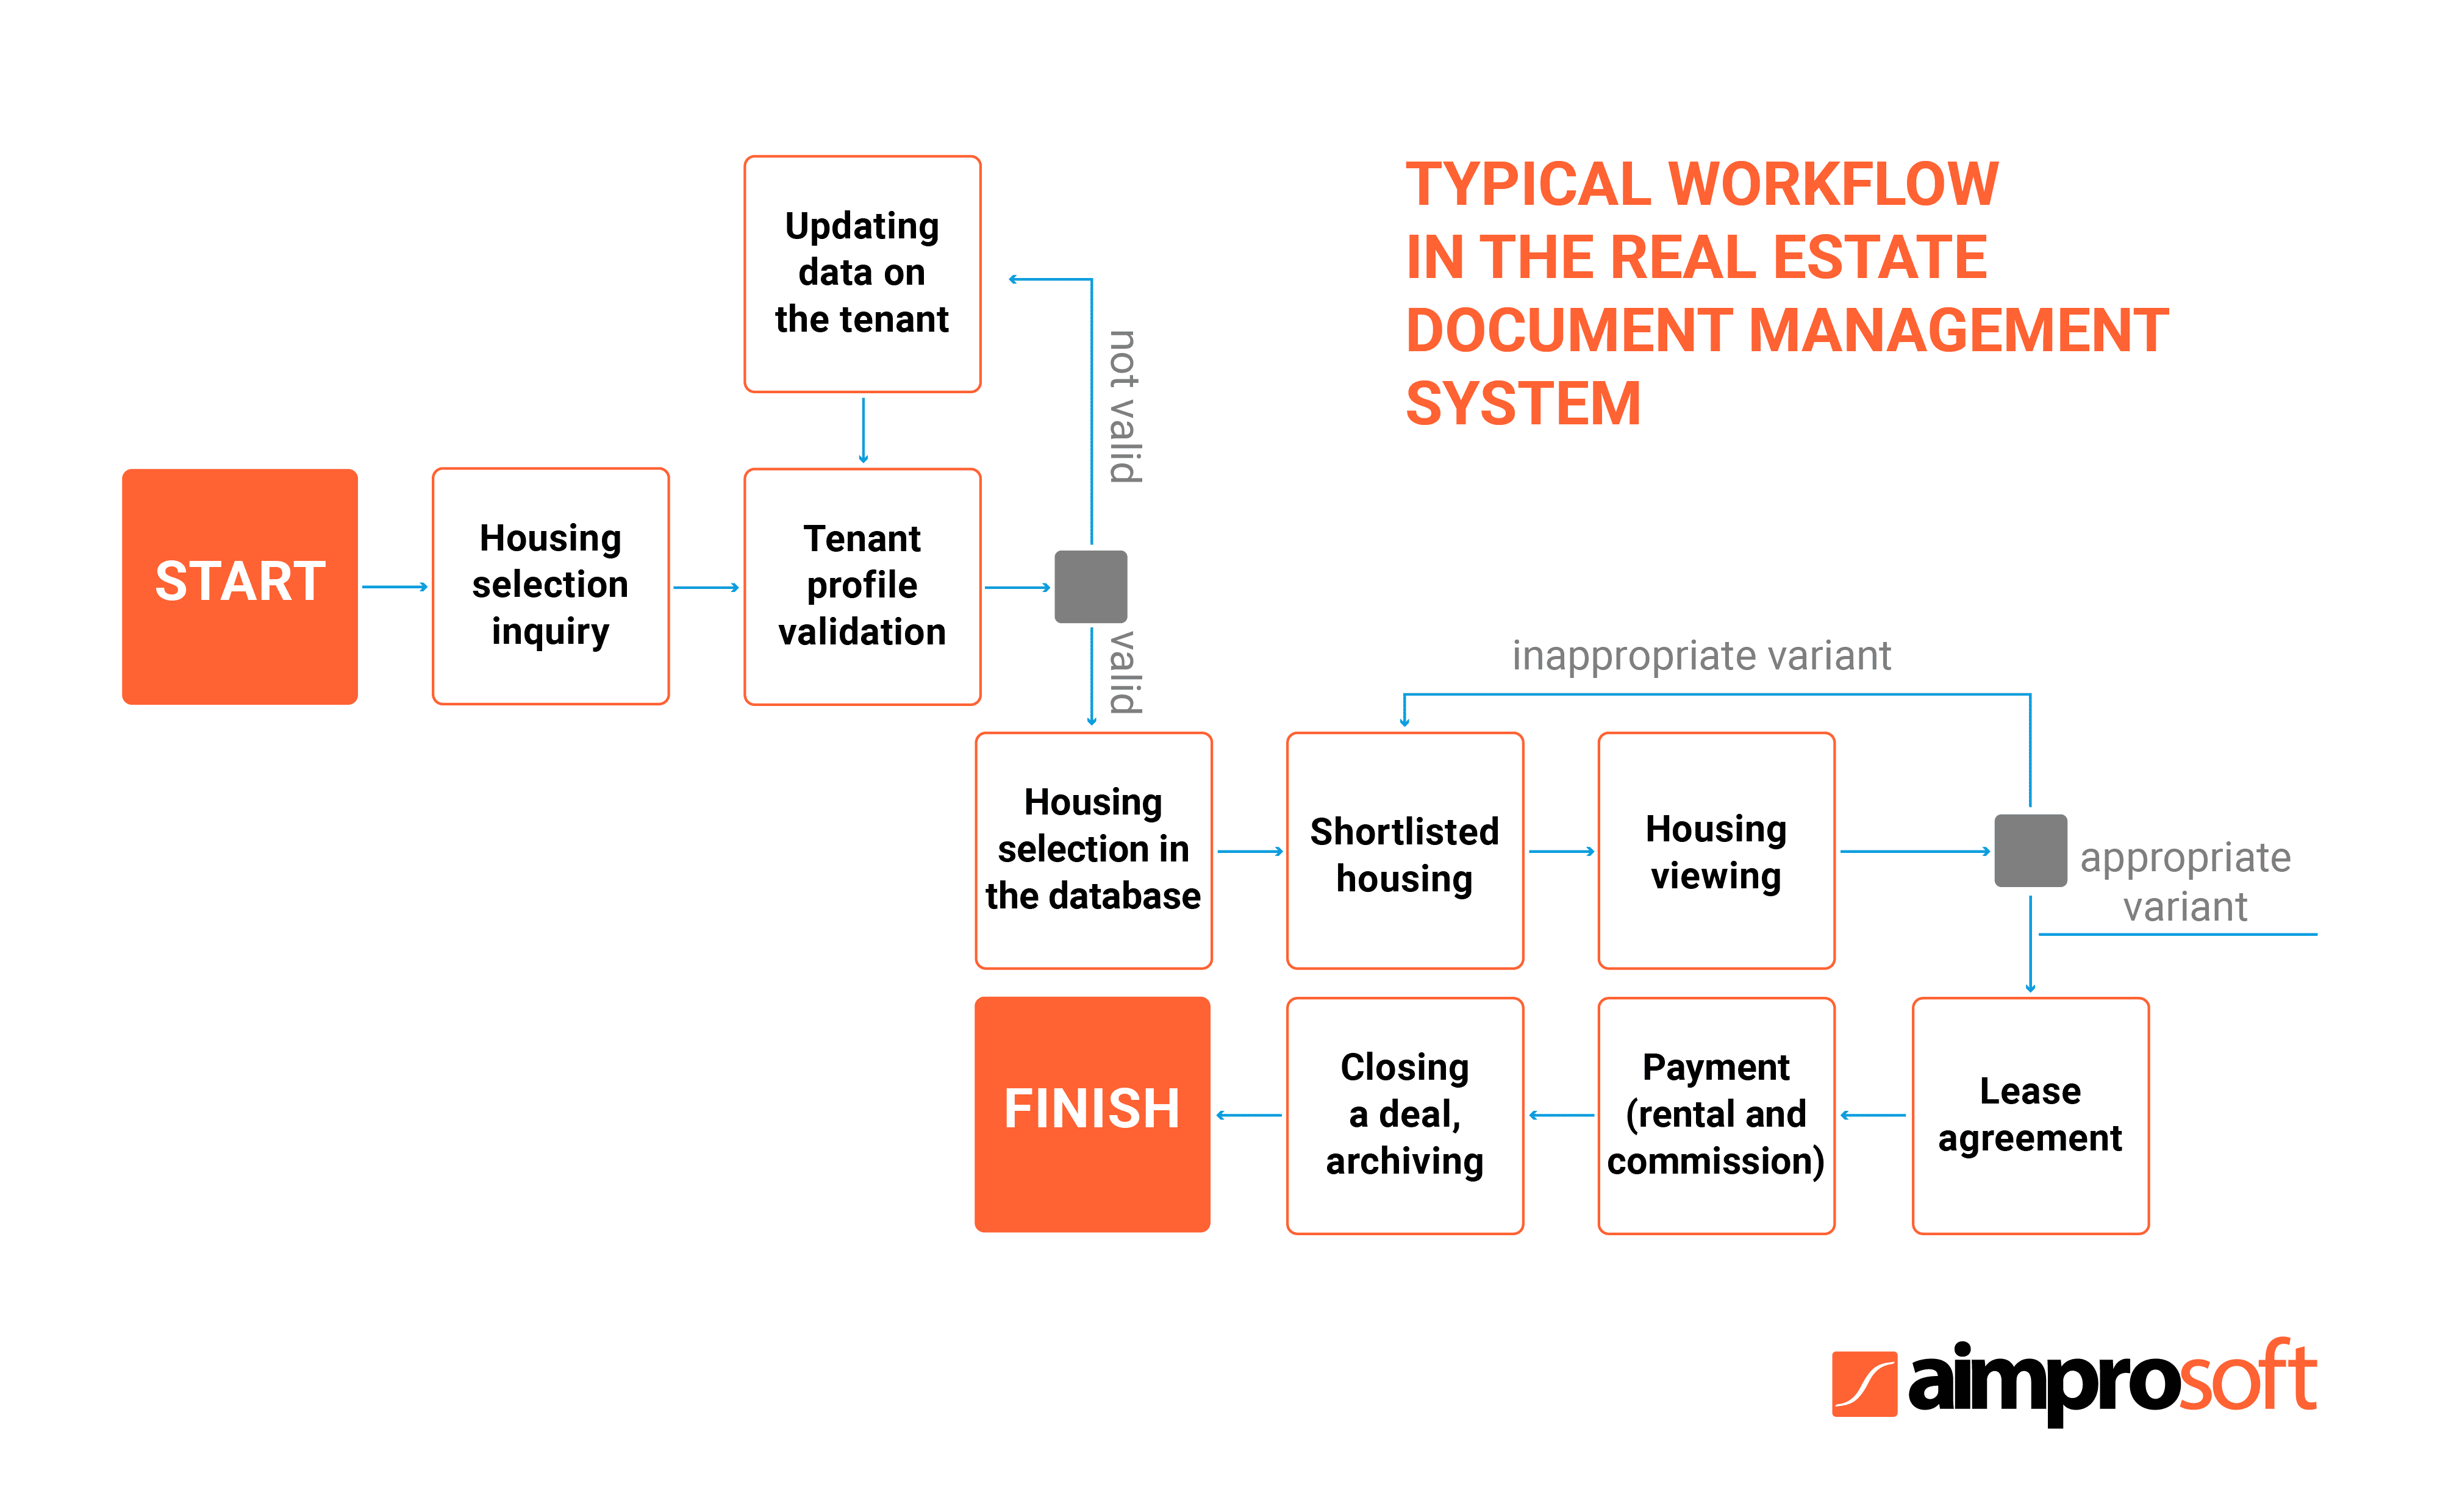 document management system with a typical workflow in the real estate company